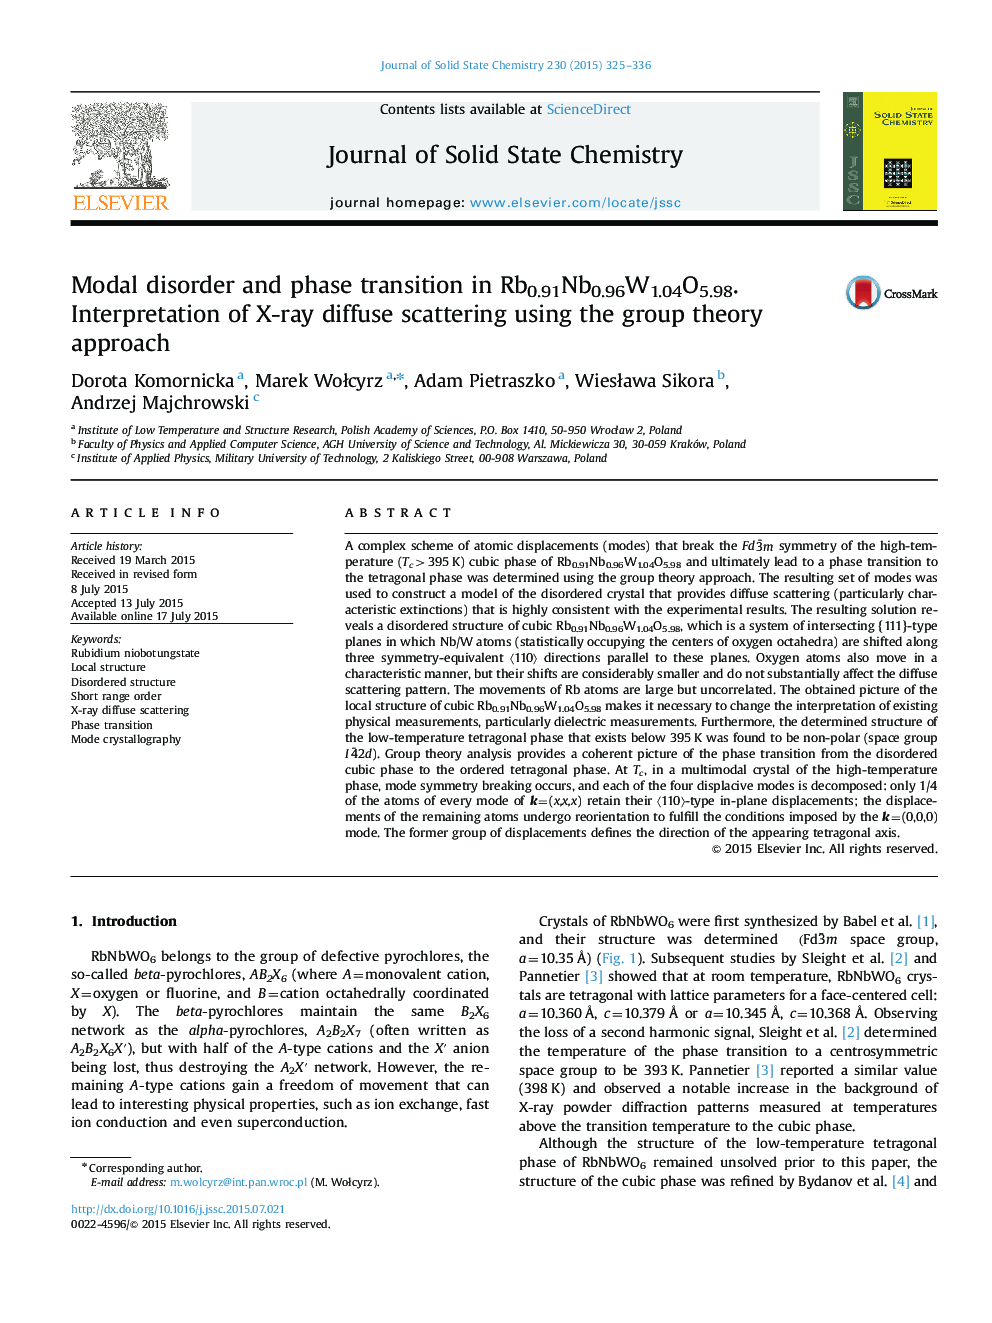 Modal disorder and phase transition in Rb0.91Nb0.96W1.04O5.98. Interpretation of X-ray diffuse scattering using the group theory approach